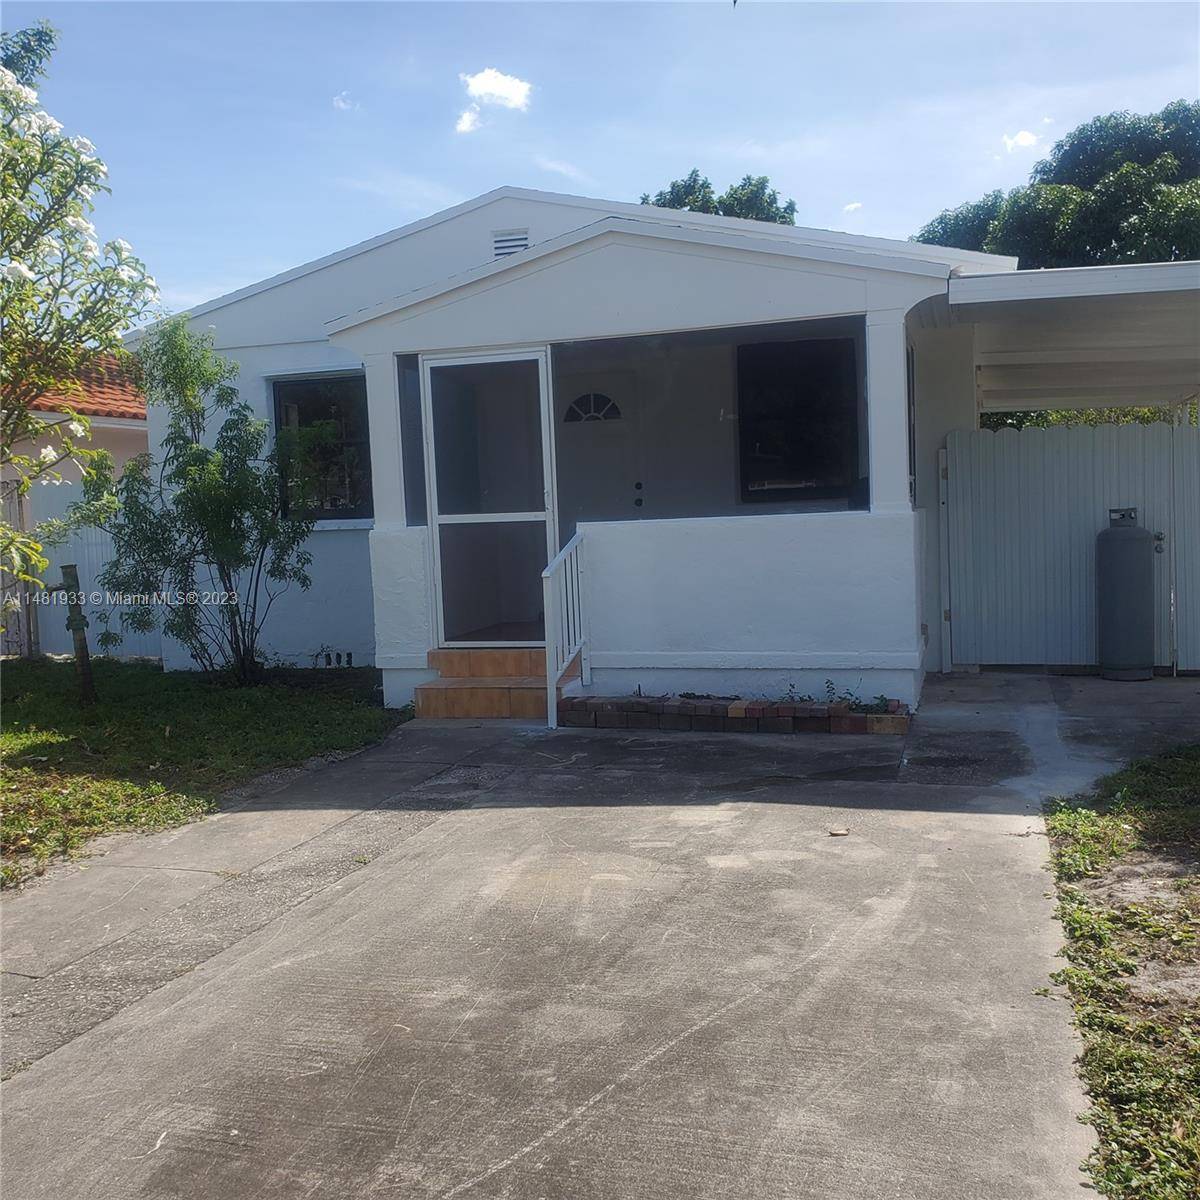 WELCOME TO THIS 2 BEDROOMS AND 1 BATH GREAT NEIGHBORHOOD COMPLETE REMODELING BRAND NEW SHINGLES ROOF AND INSULATION CENTRAL A C AND ELECTRICAL BOX UPDATED KITCHEN NEW CABINETS WITH SOFT ...